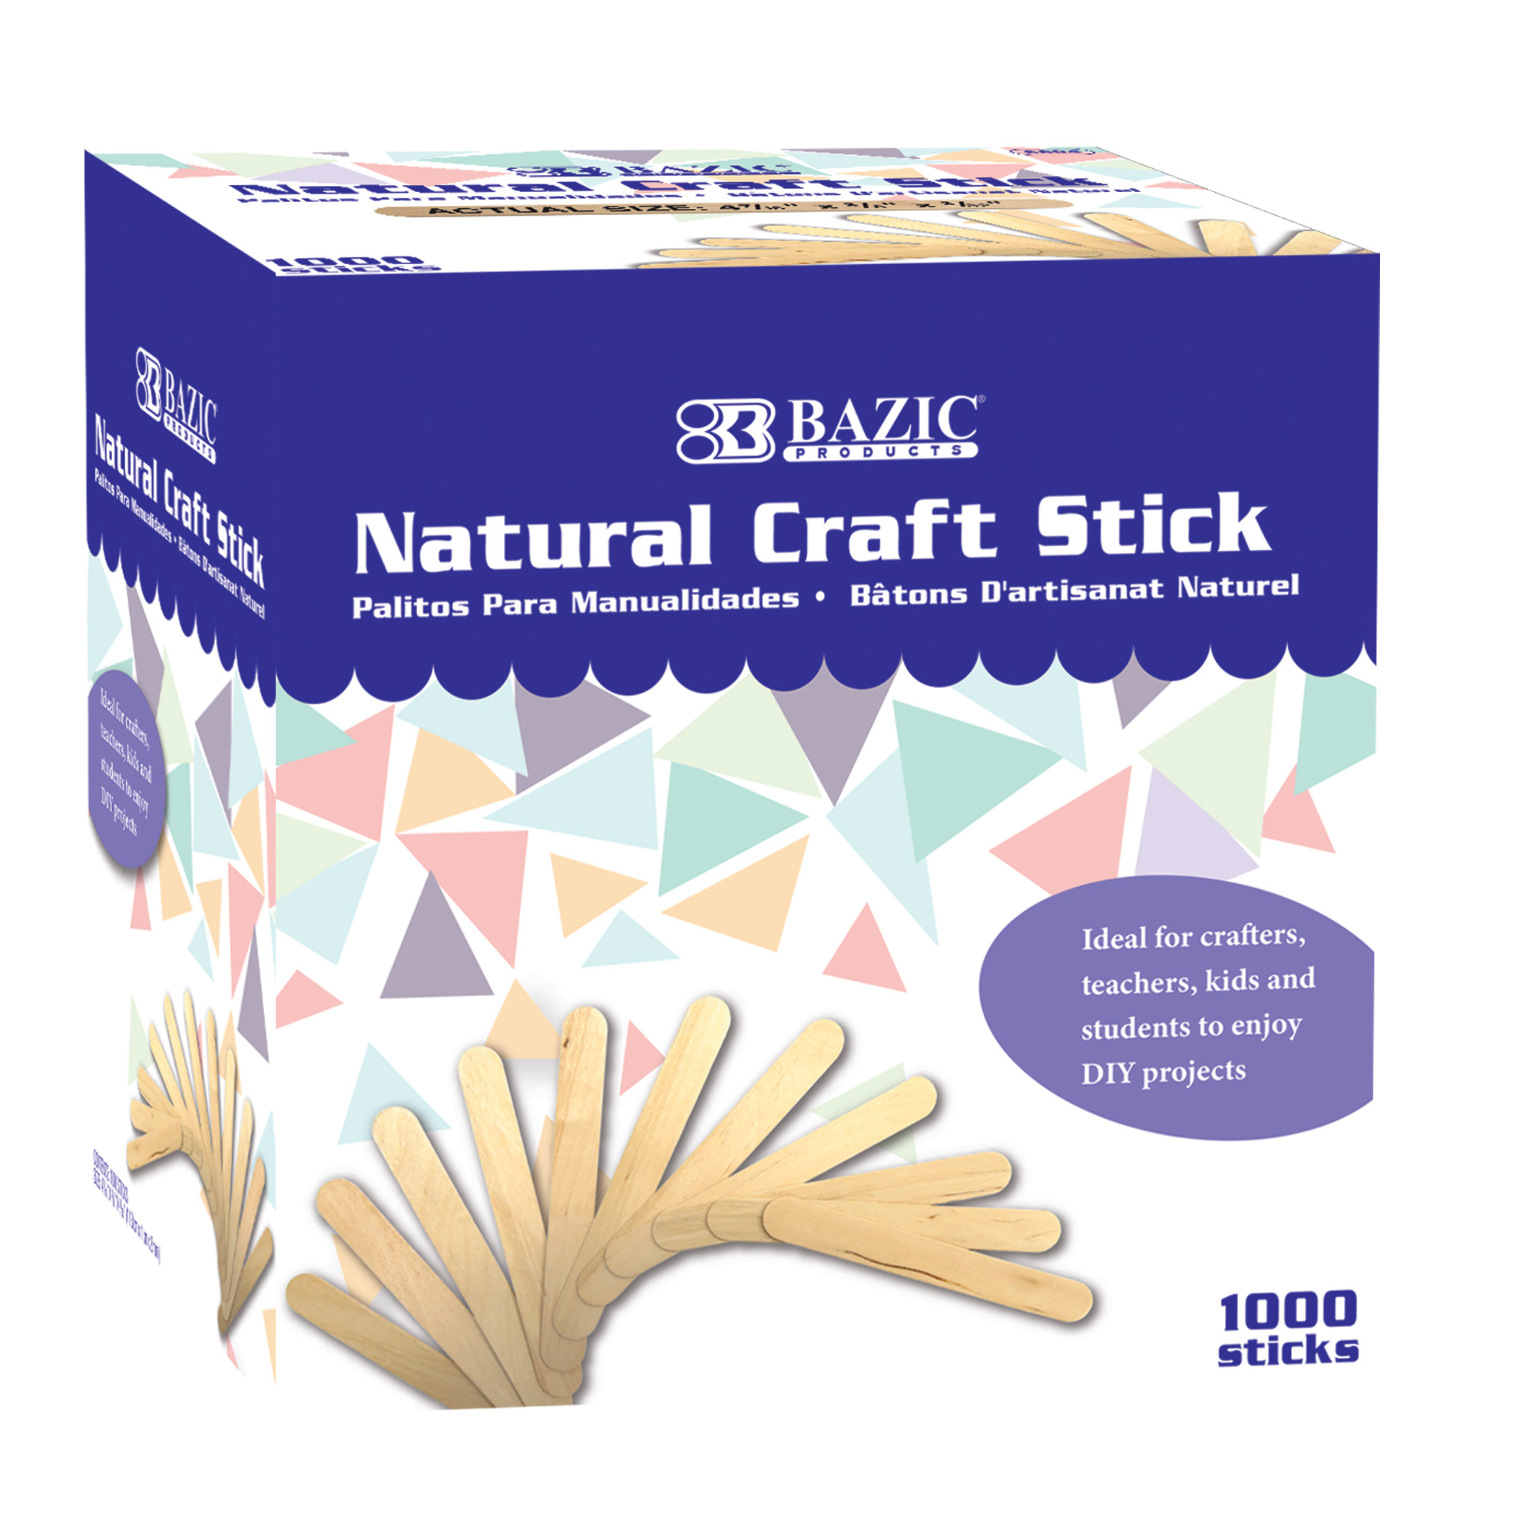 Wooden Lolly Sticks Natural Wood - 1000 Pack, Catering Disposables